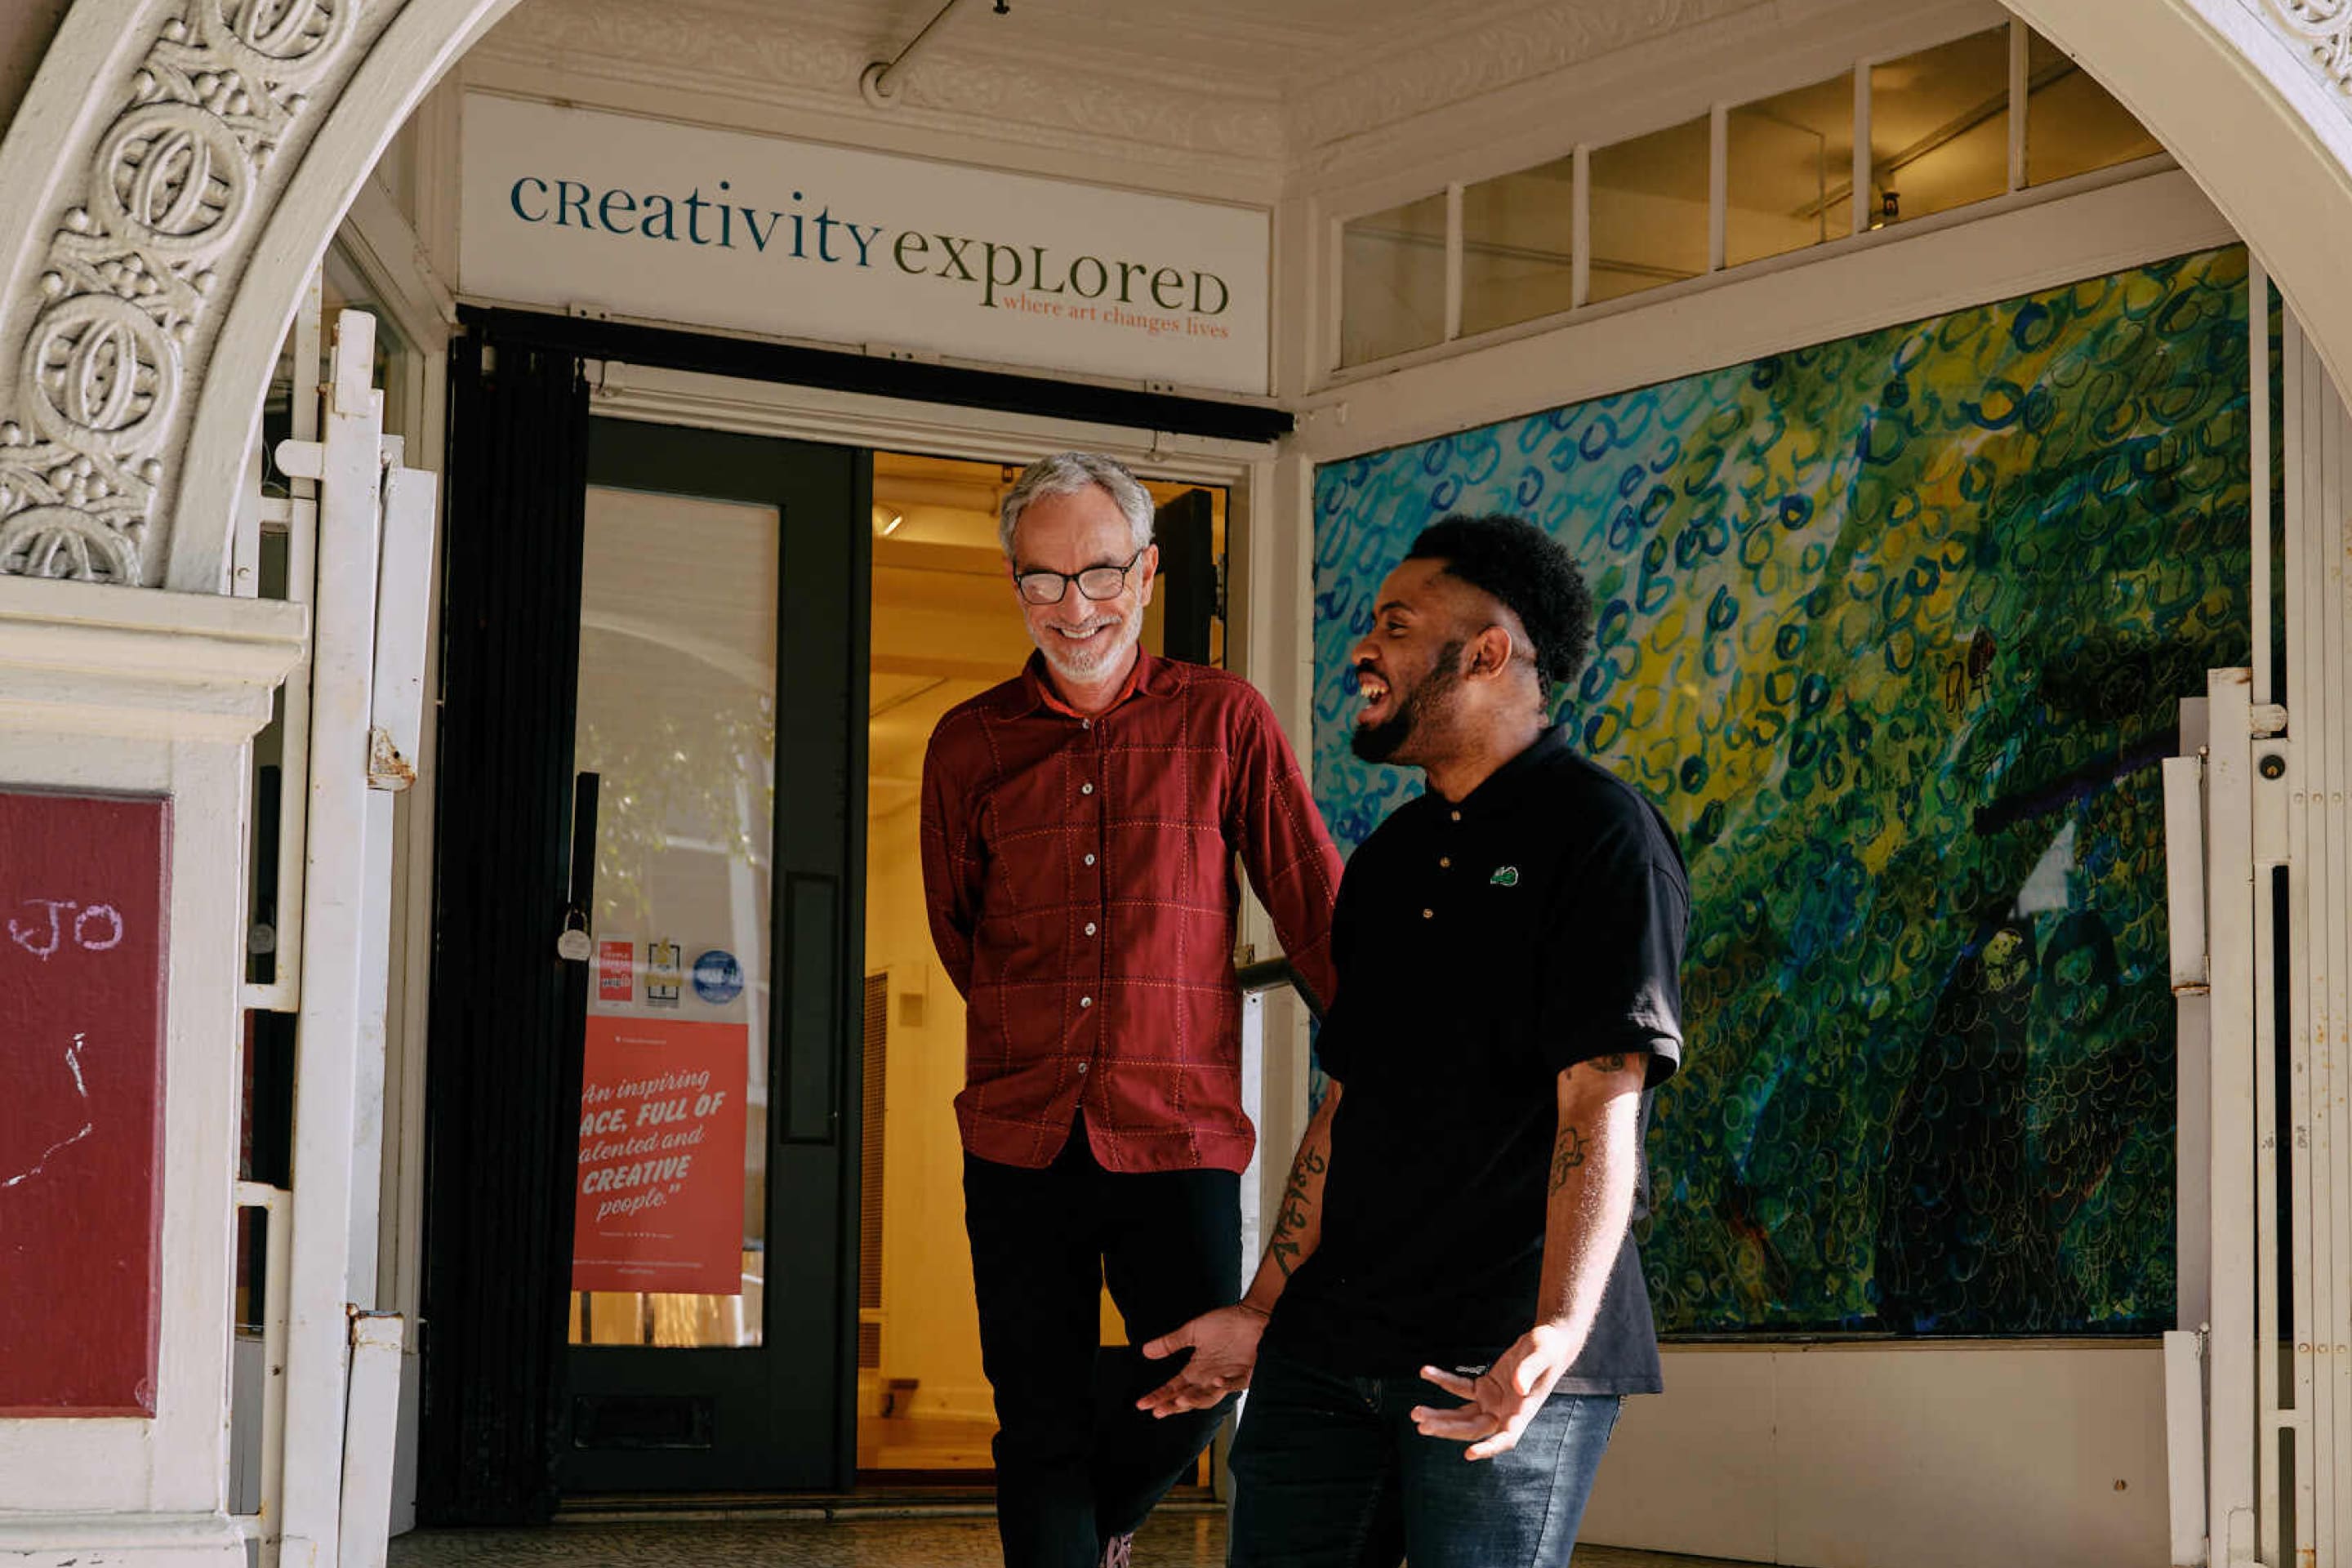 Joseph "JD" Green and Glenn Peckman laugh together outside of Creativity Explored.